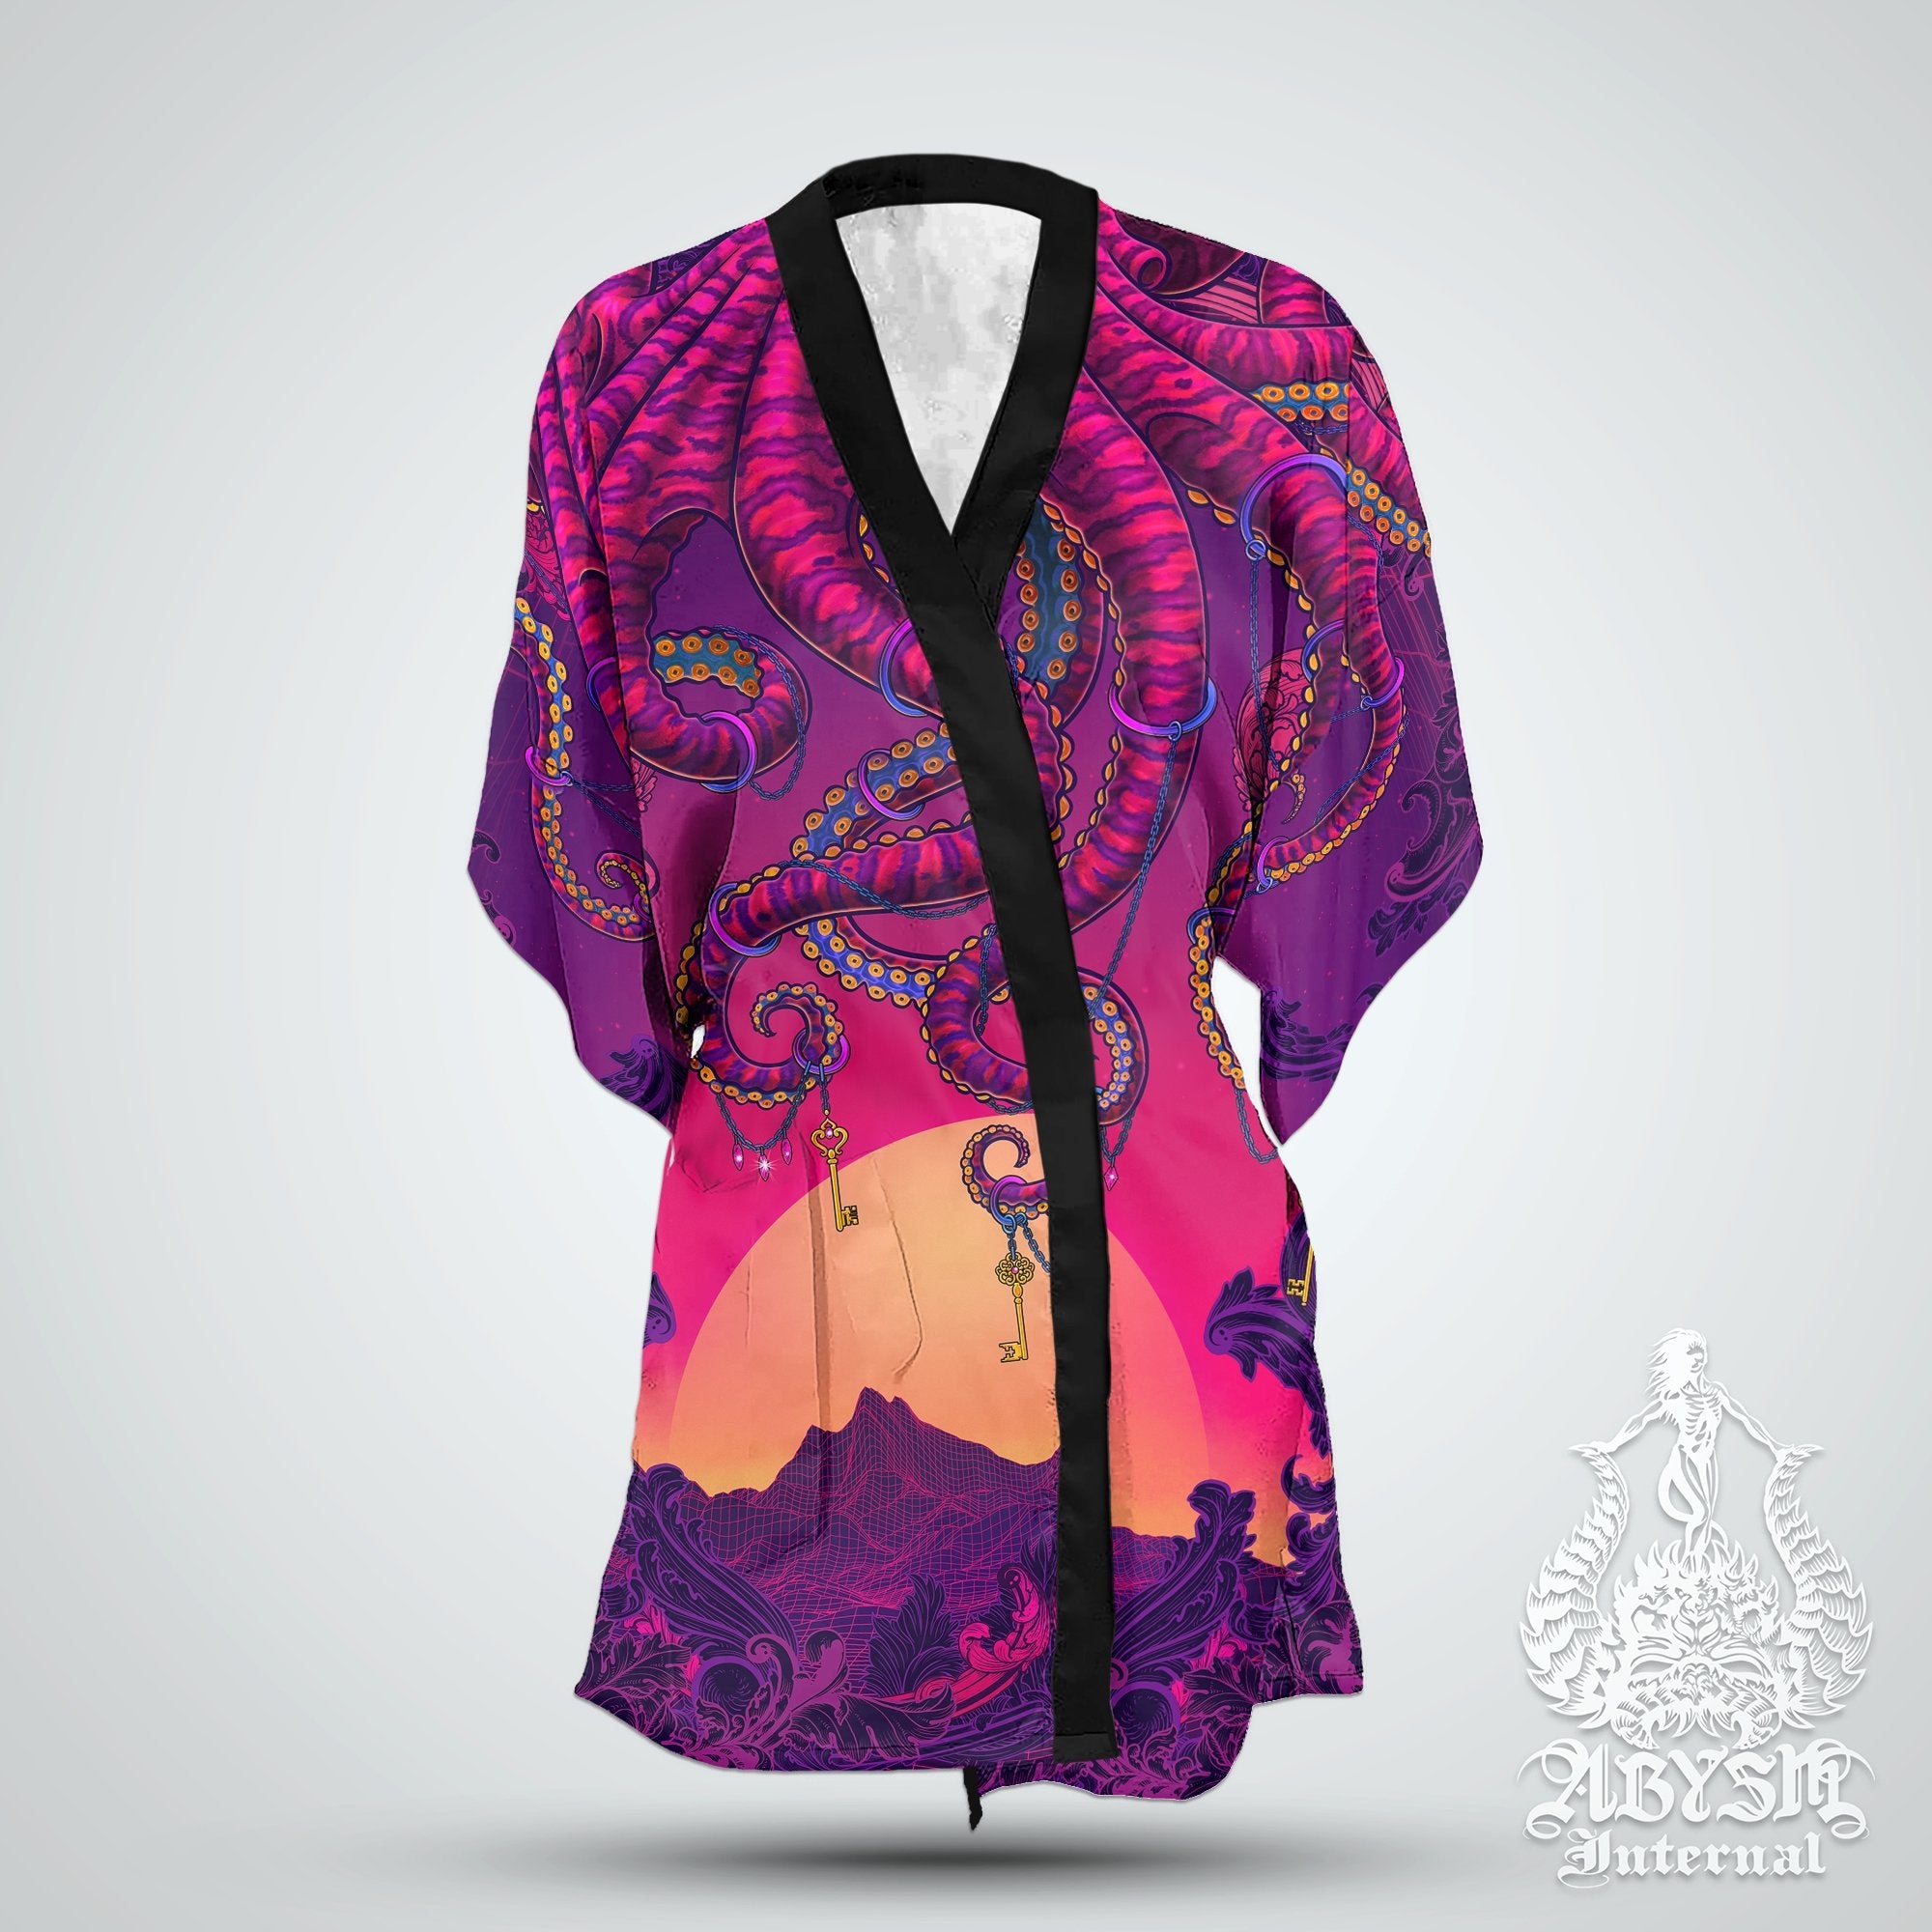 Vaporwave Cover Up, Synthwave Outfit, Retrowave Party Kimono, Summer Festival Robe, 80s Art, Alternative Beach Clothing, Unisex - Octopus - Abysm Internal